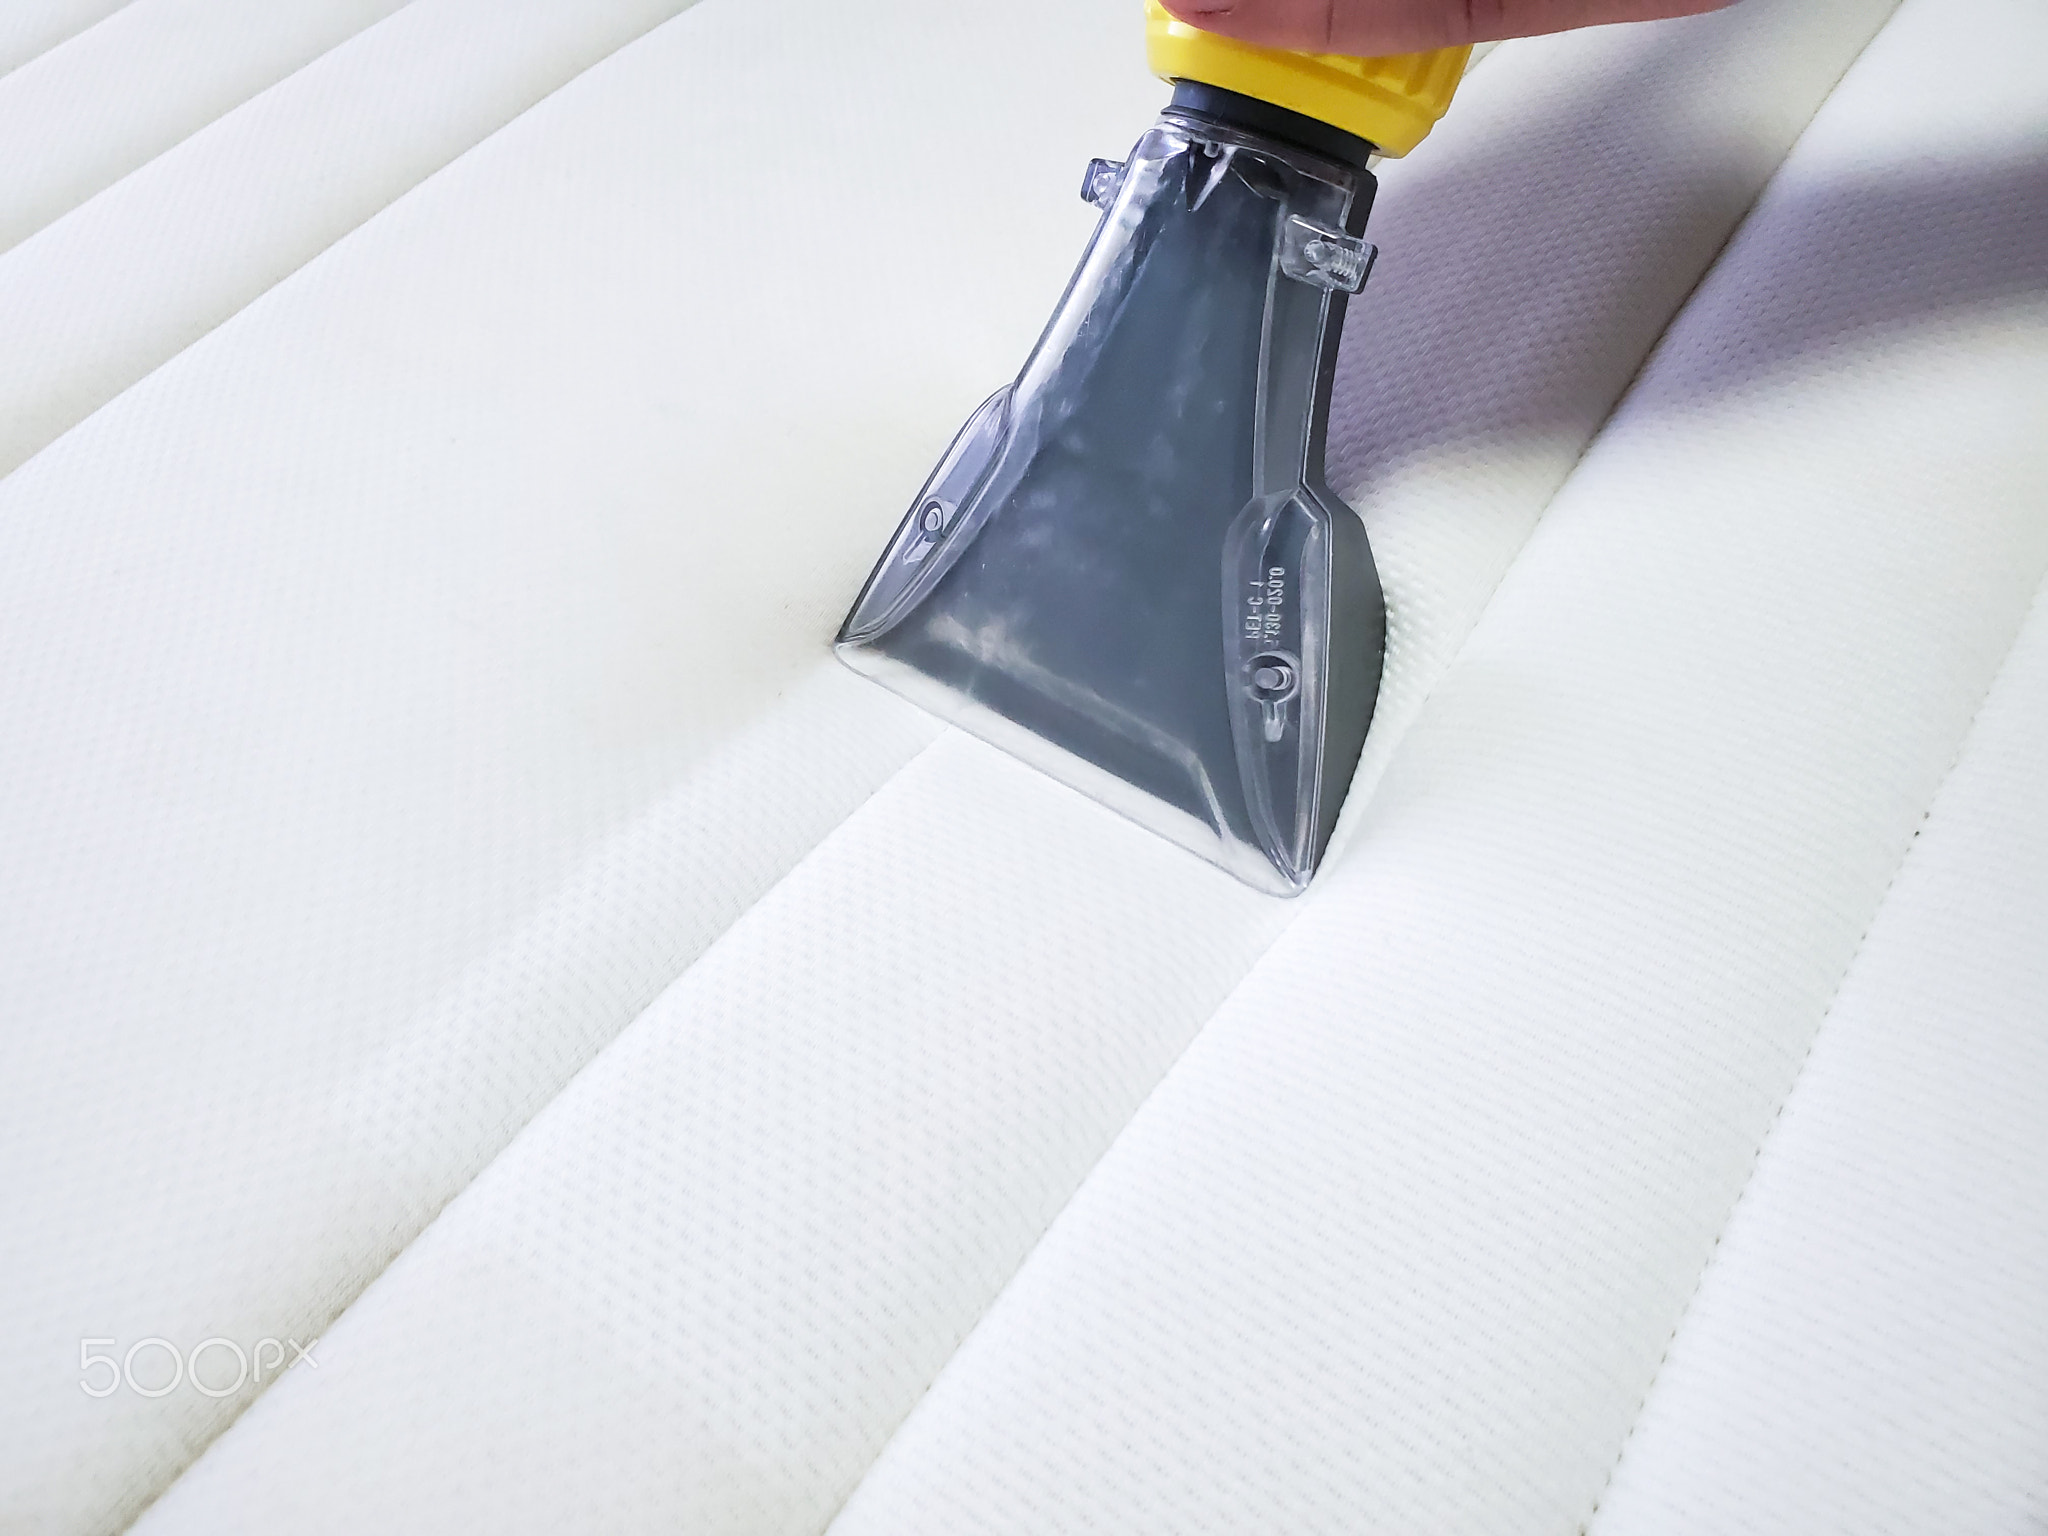 Mattress dry cleaning with professional extraction method. Close up